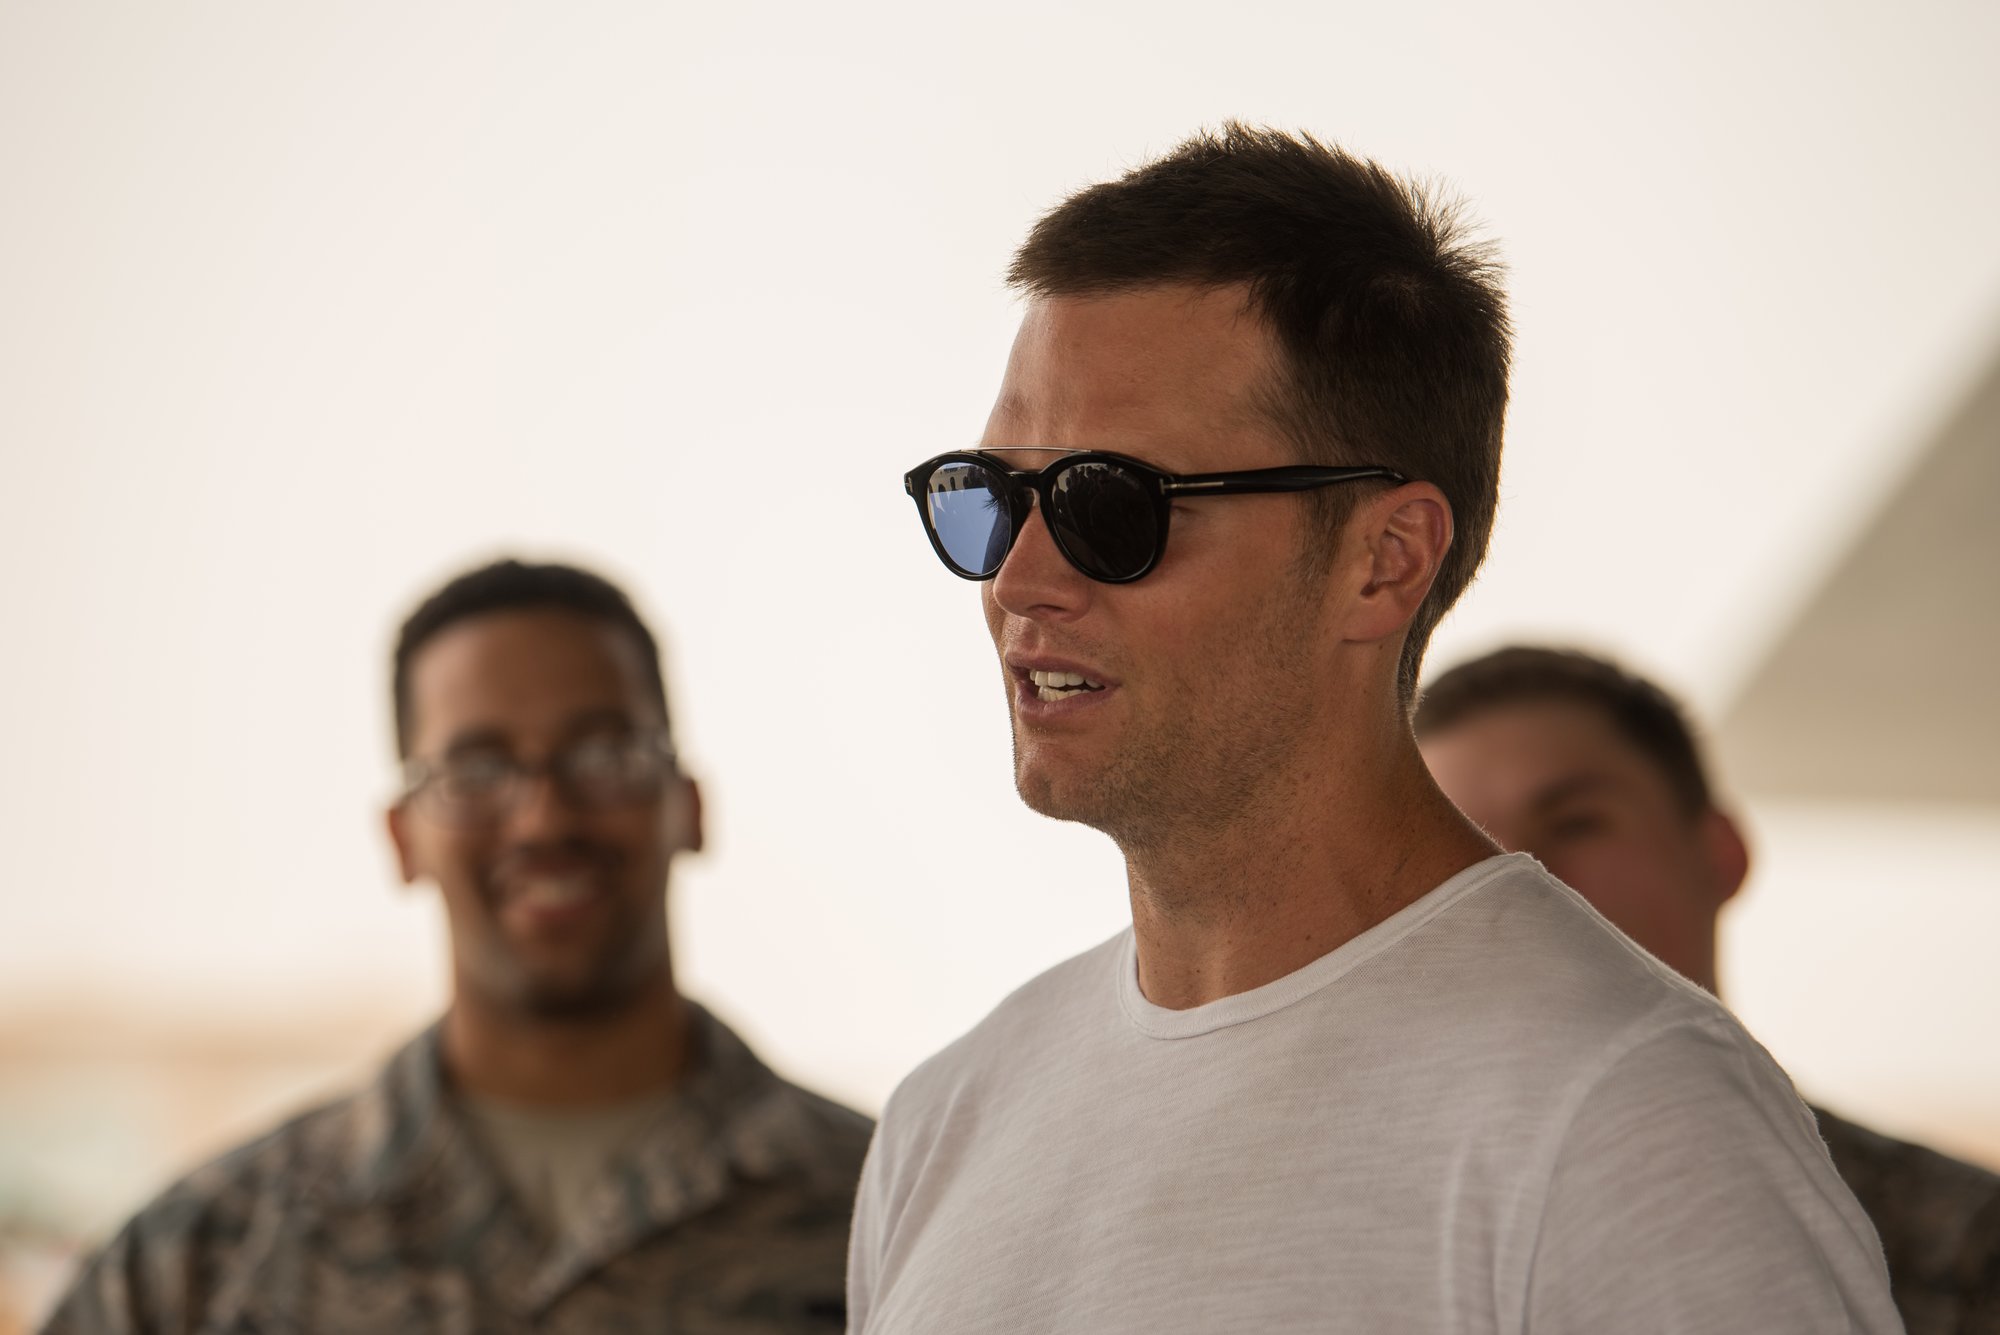 Legendary NFL quarterback Tom Brady is under fire (figuratively) for comparing football to combat. The only problem is, he didn't actually do that. So why the flak? U.S. Air Force photo by Staff Sgt. Joshua Horton.